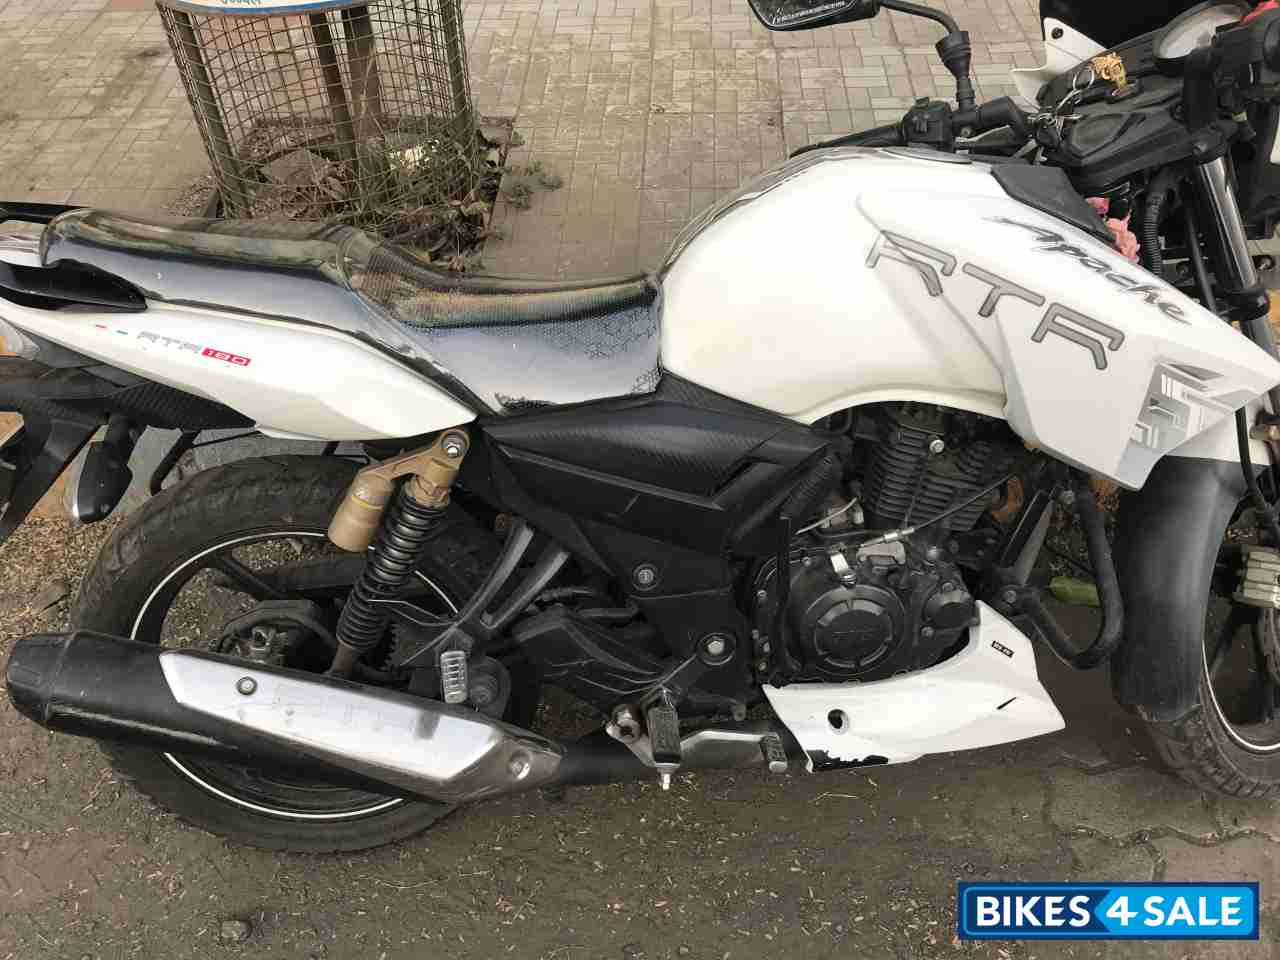 Used 2017 Model Tvs Apache Rtr 180 For Sale In Mumbai Id 255235